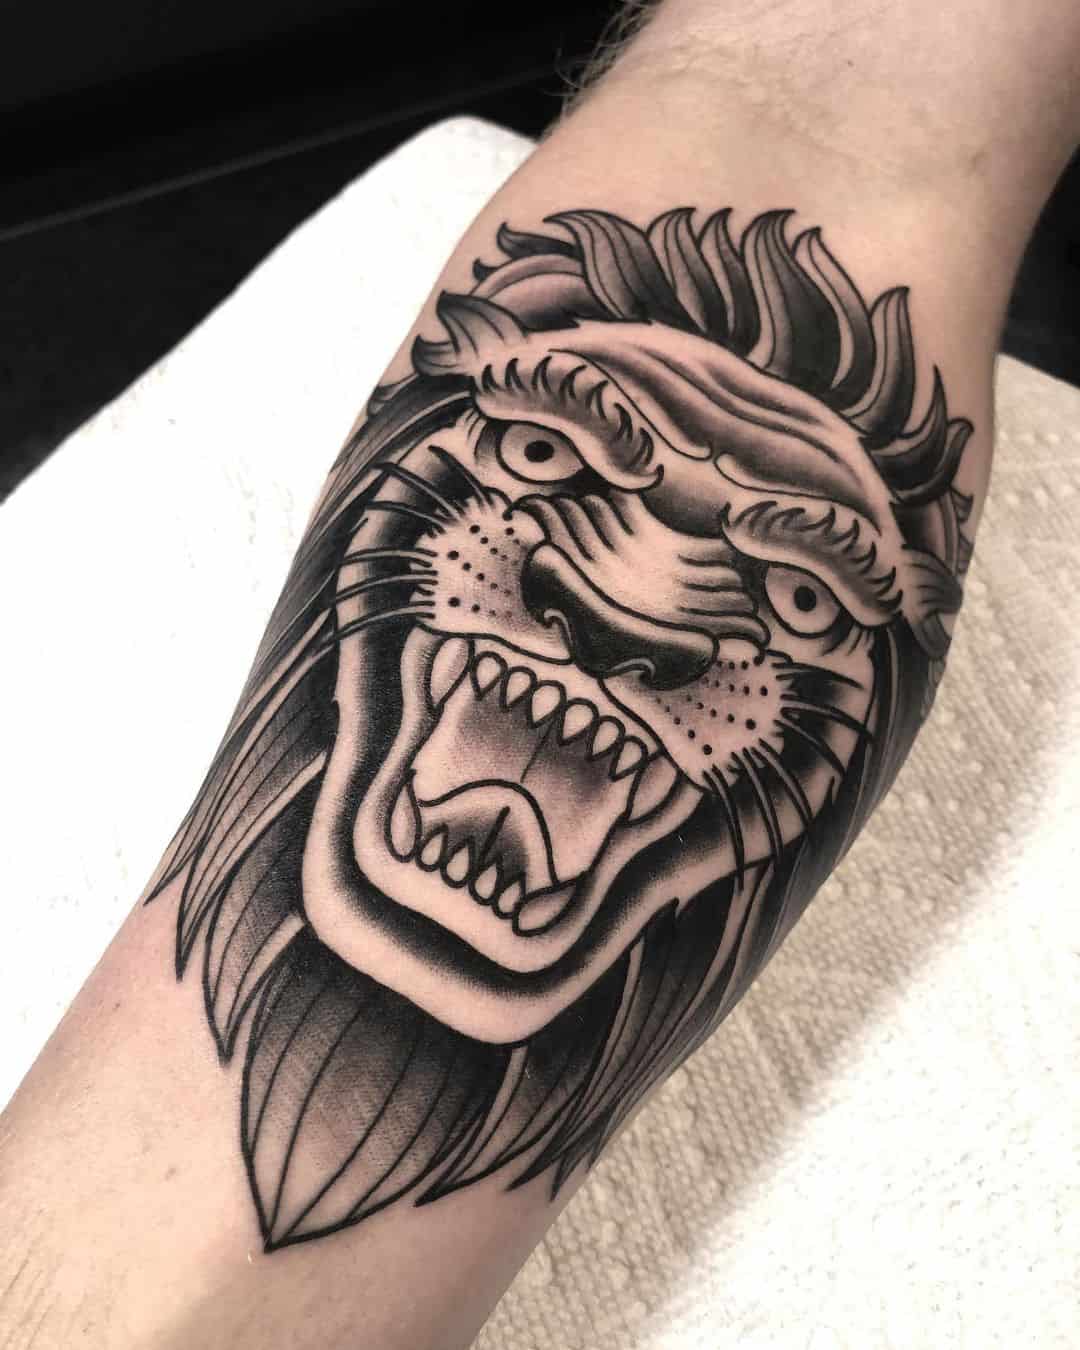 Tattoo uploaded by Georgi Nikolov • “The world is a jungle you either fight  and dominate or hide and evaporate!” Big cover up with lion of Judah in  process.😱🔥🇧🇬✍🏻🦁 •••••••••••••••••••••••••••••••••••••••••••••••••••••  #realistic#lion#liontattoo ...